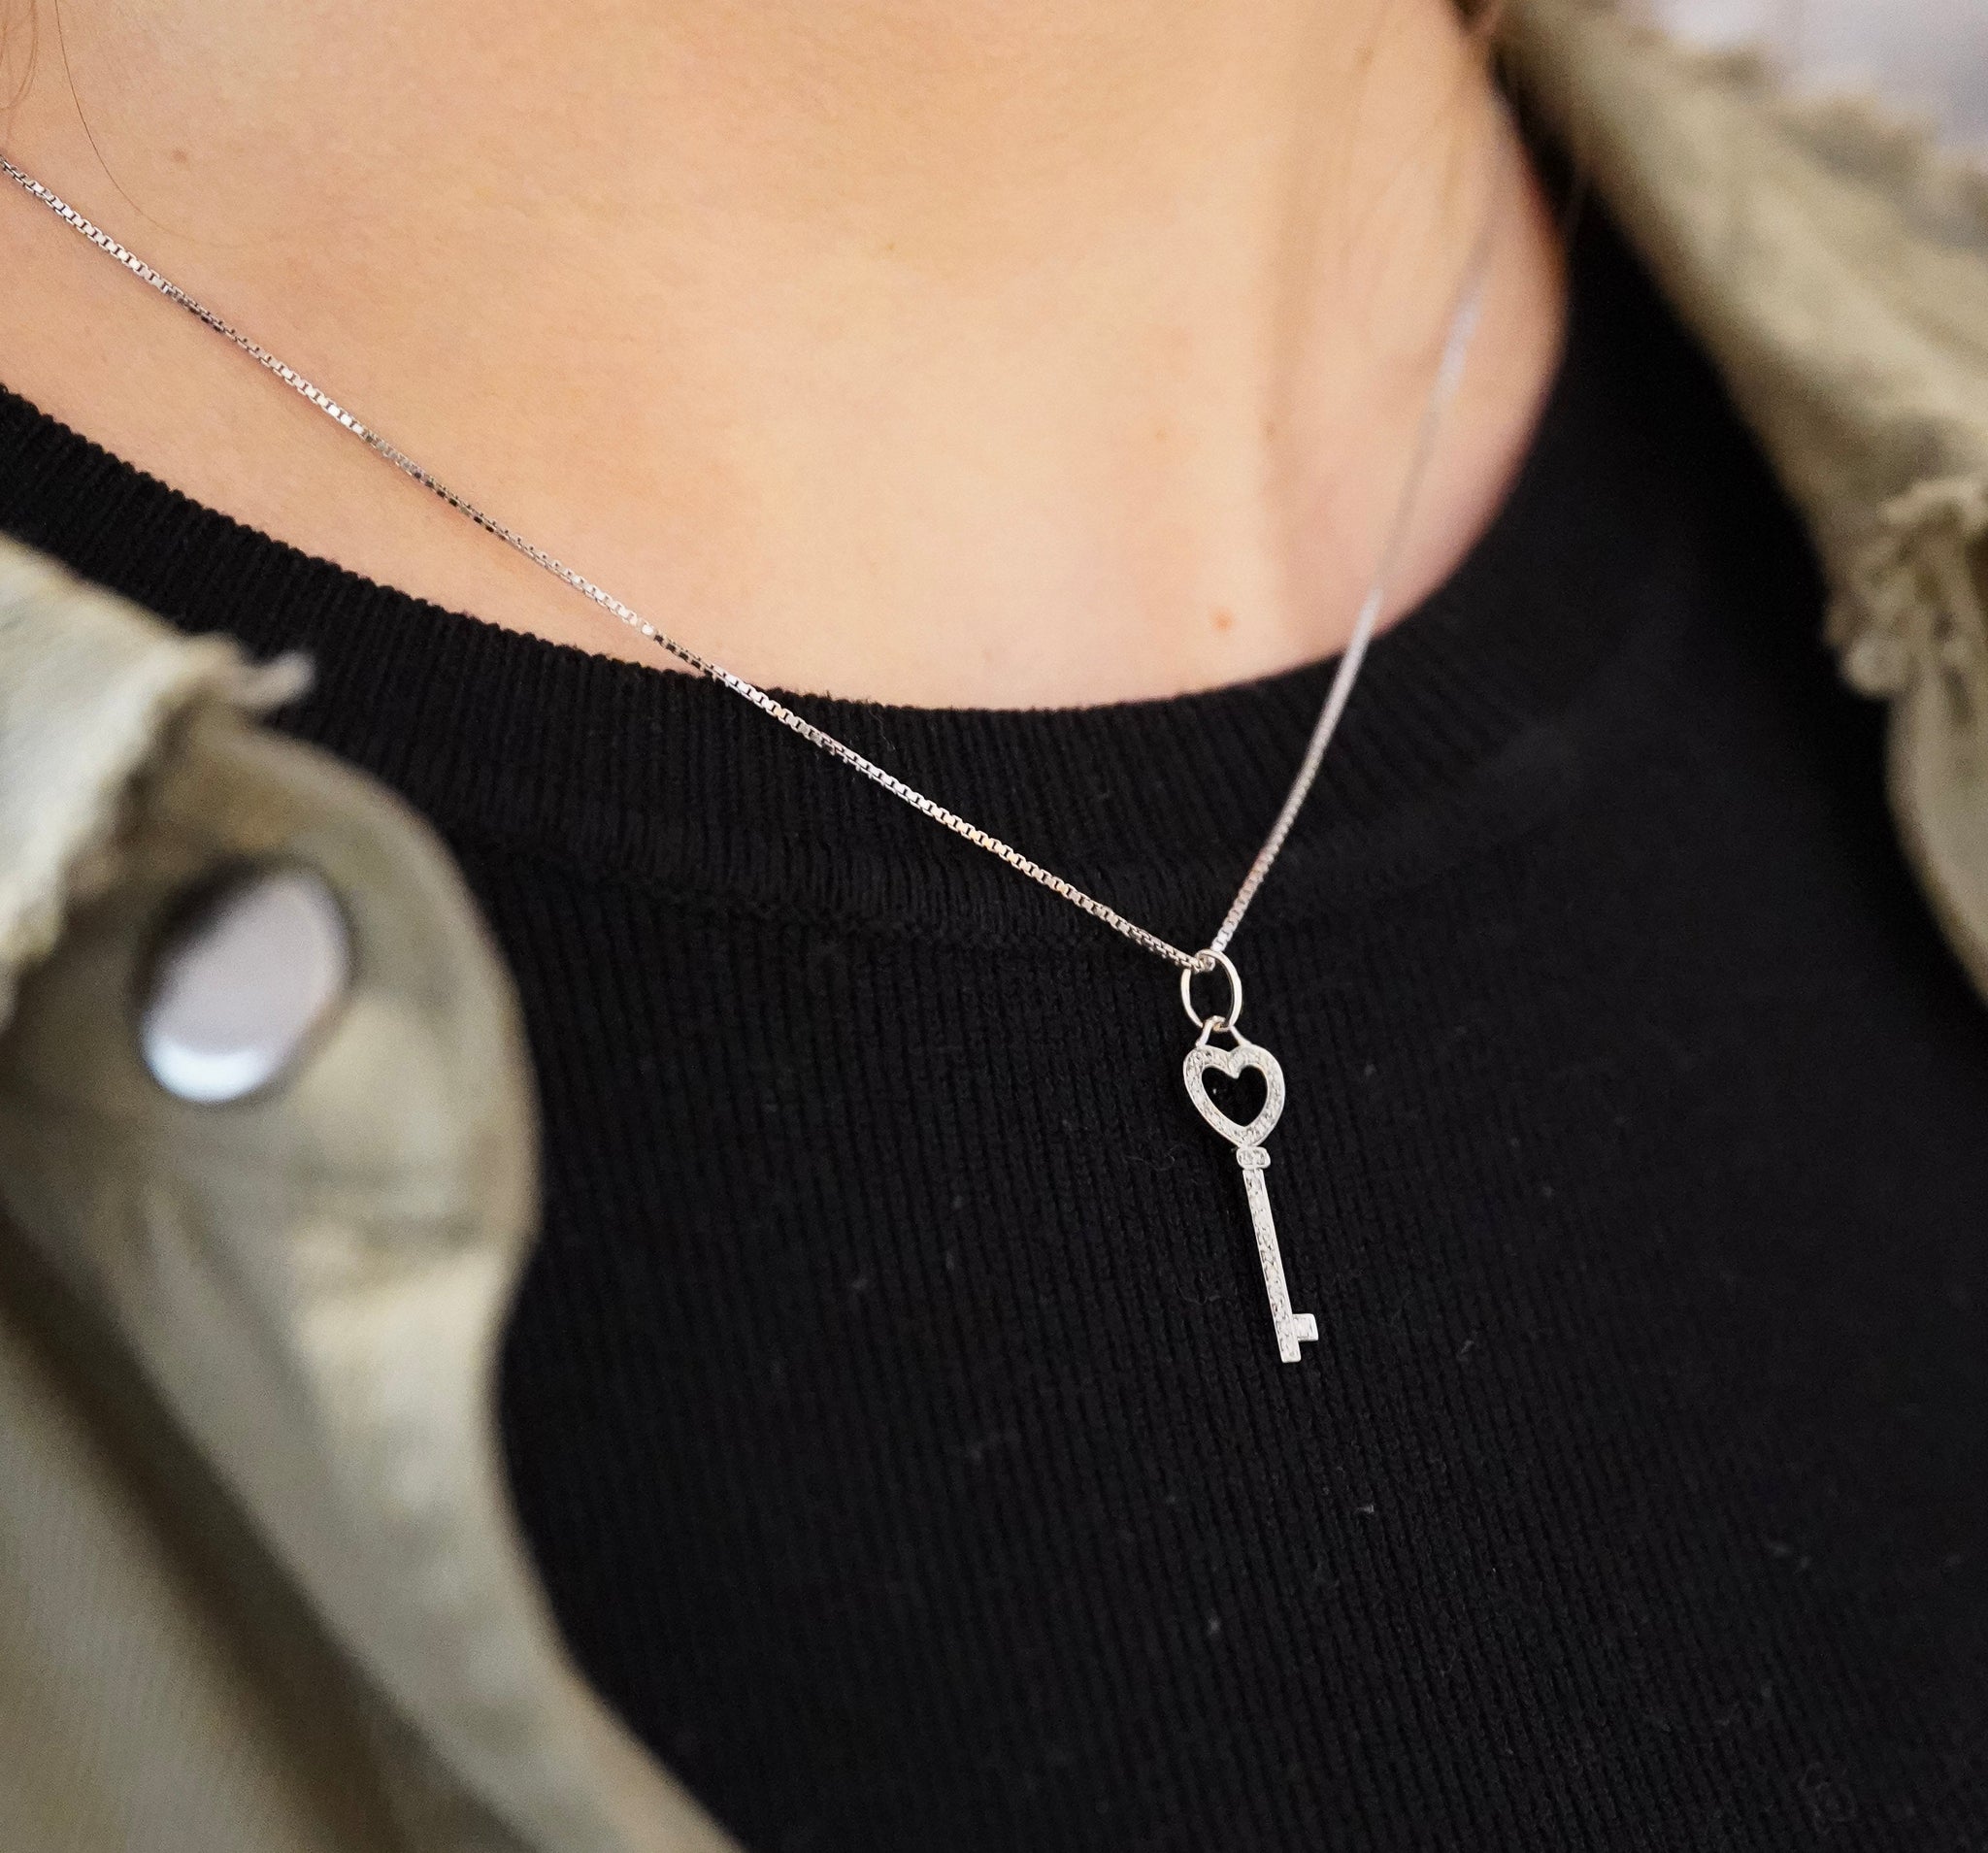 14K White Gold Natural Diamond Key To My Heart Pendant Necklace